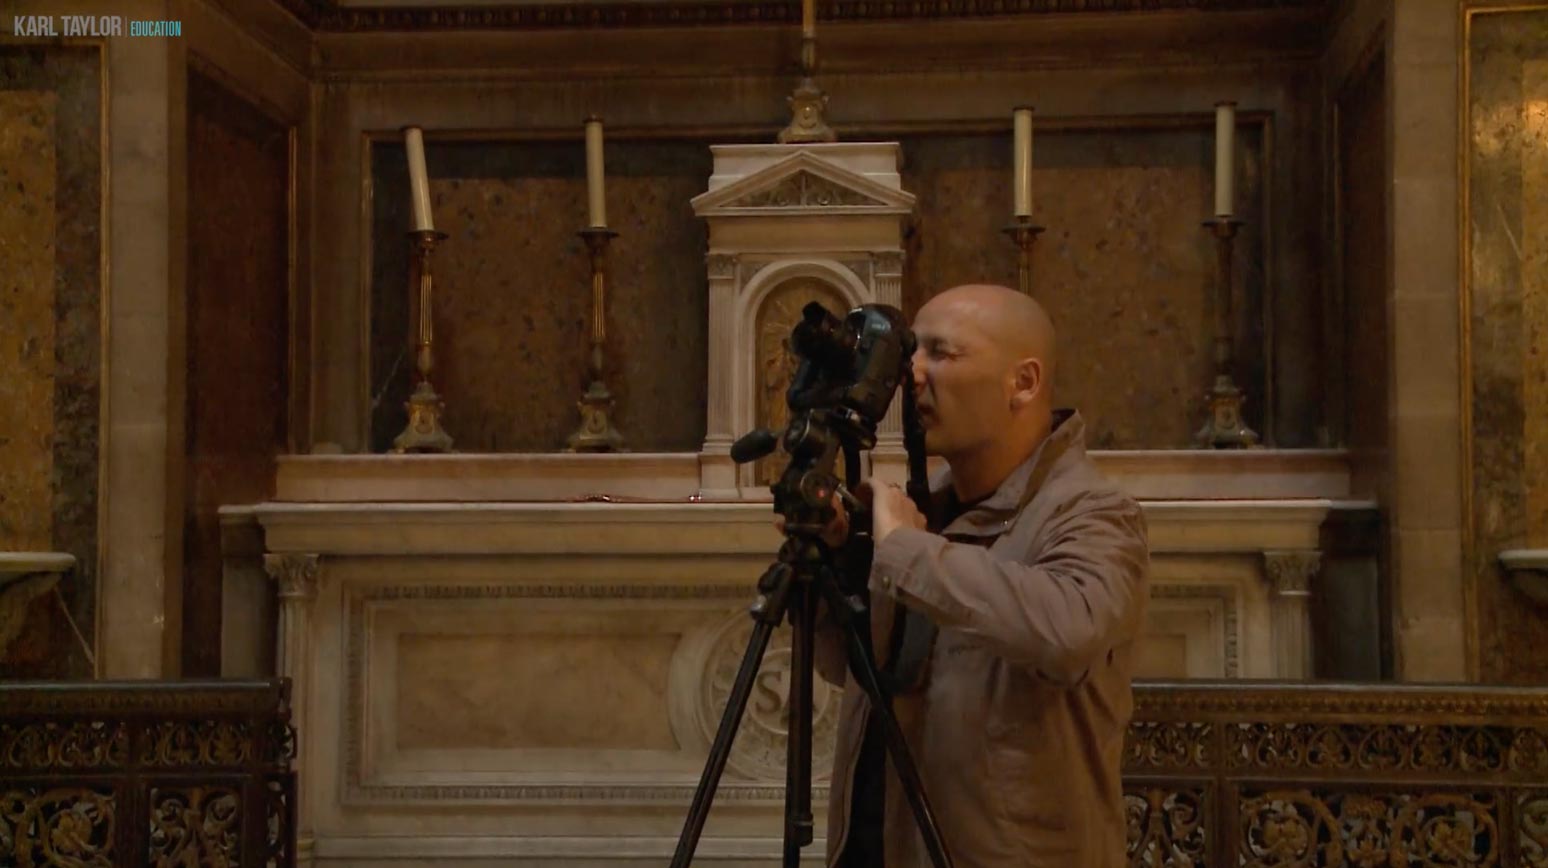 Karl using a tripod for photography architecture